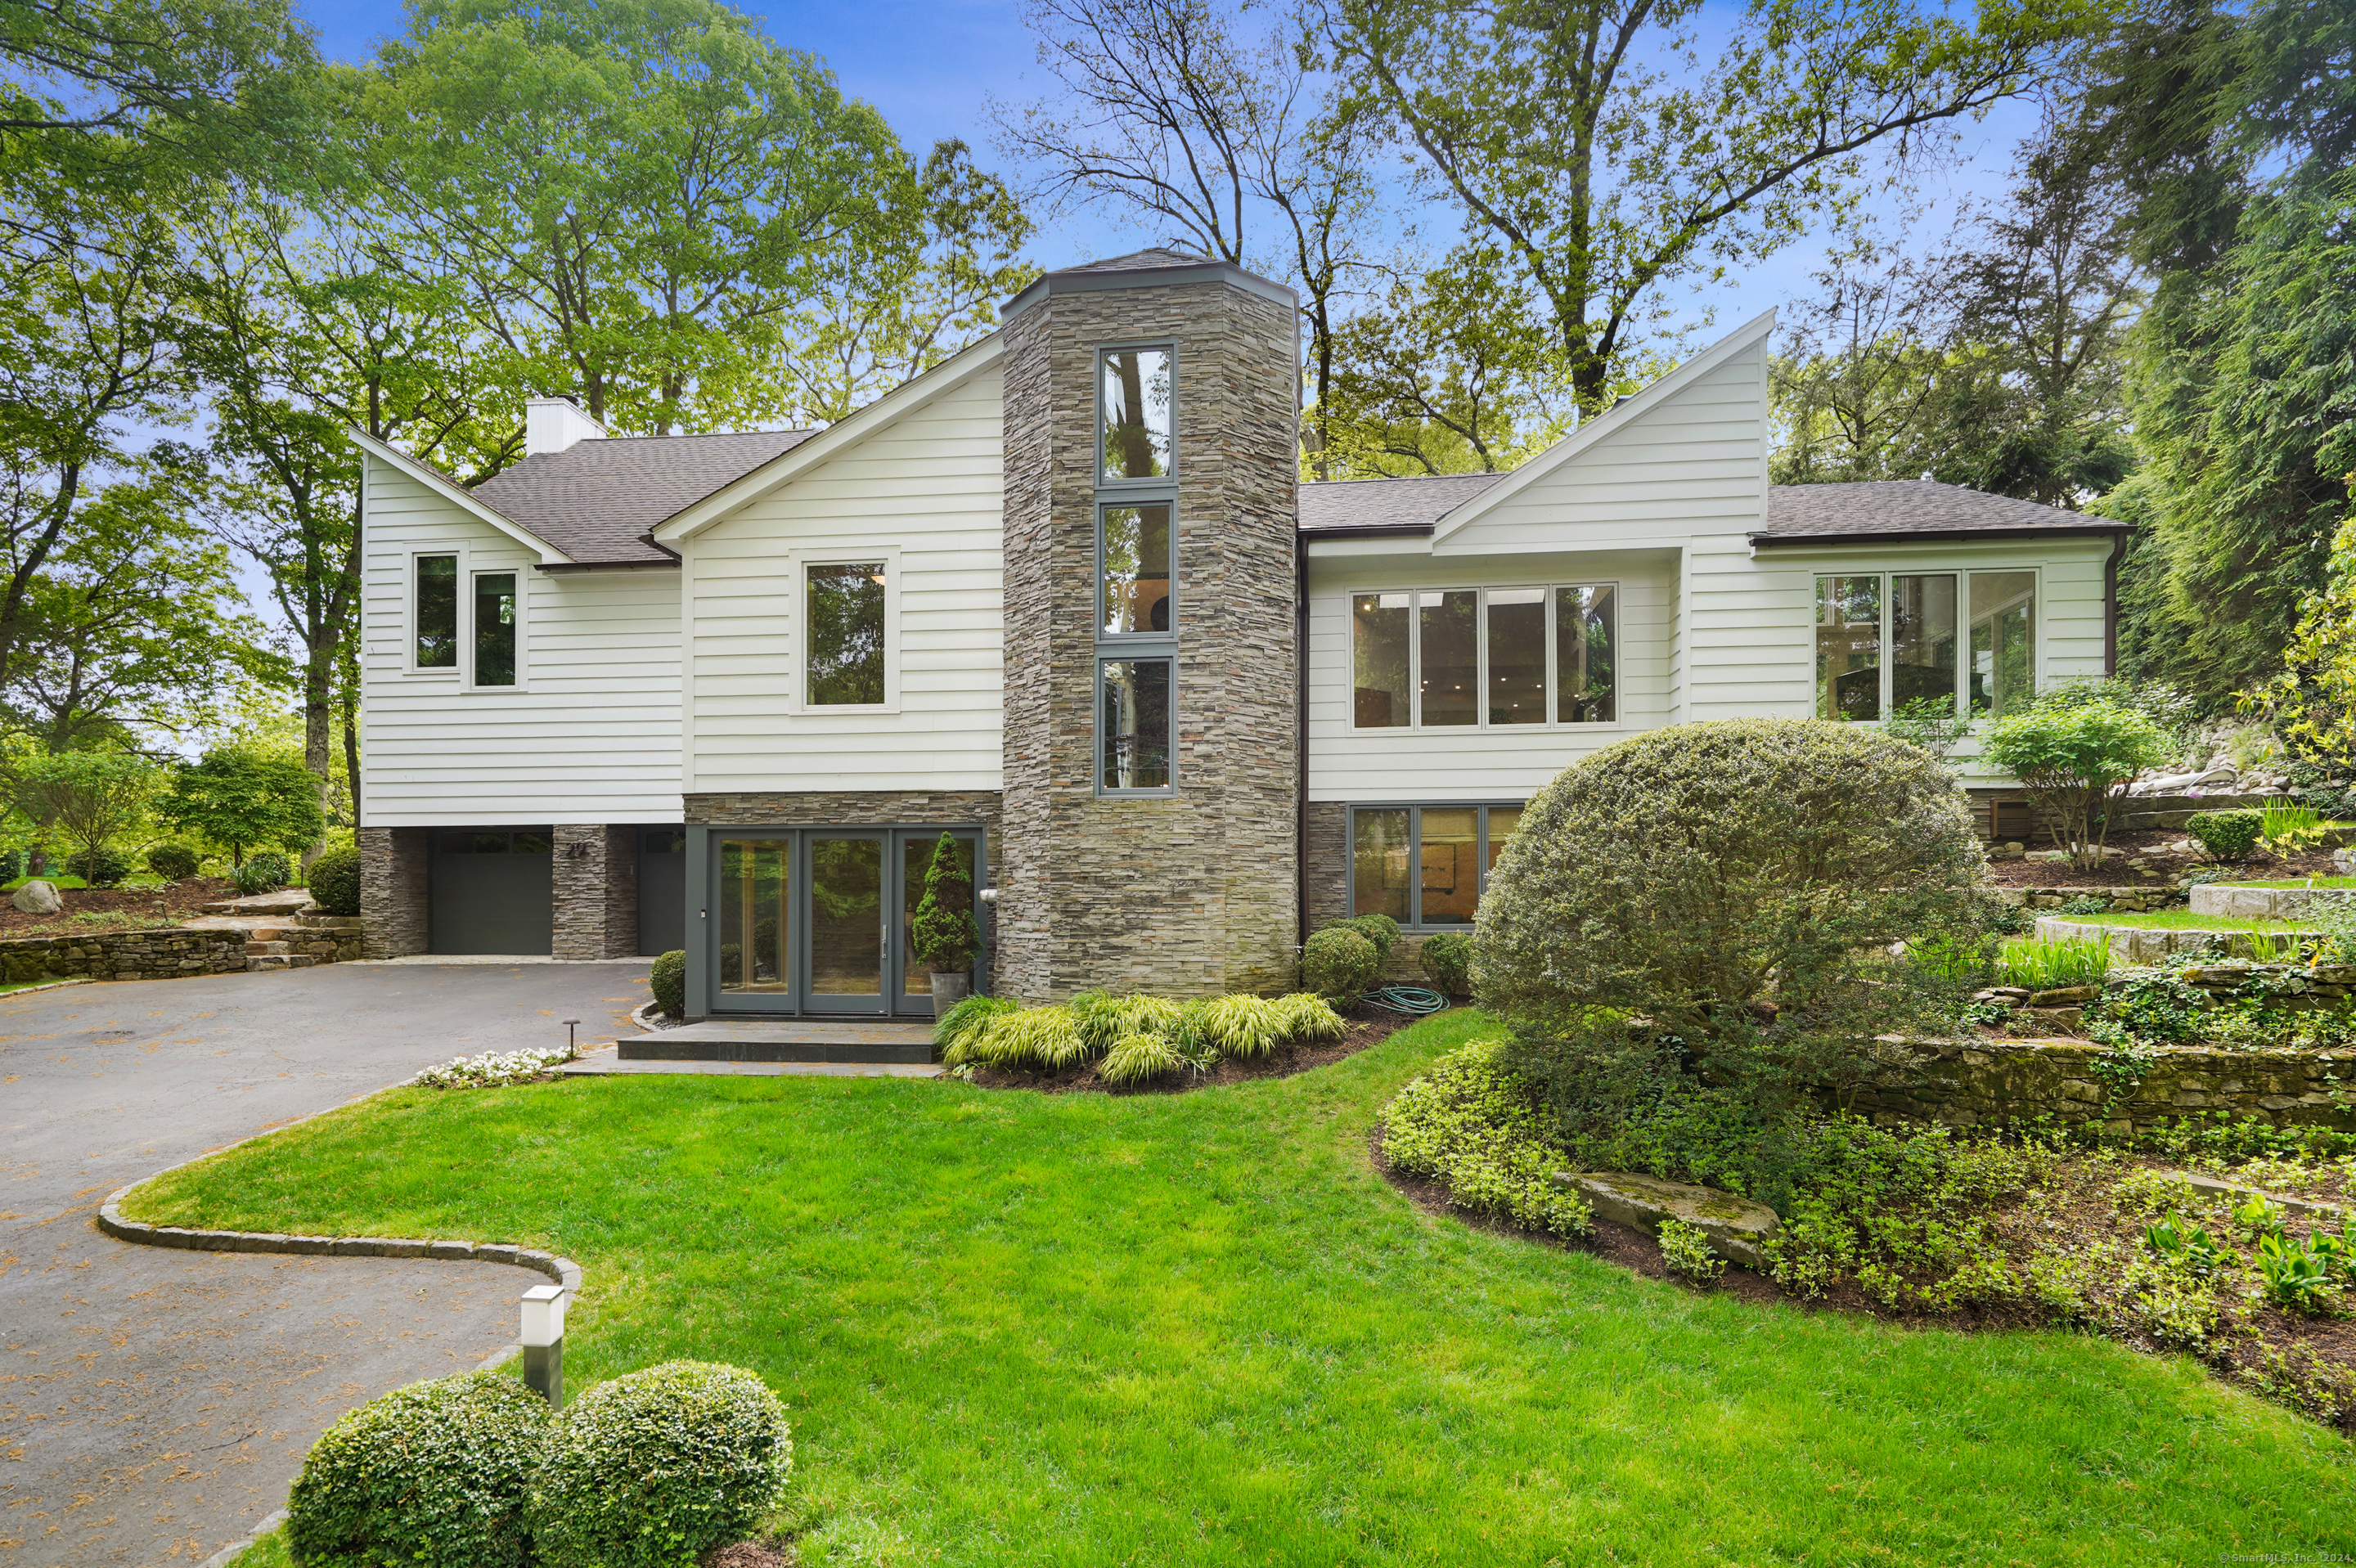 This classic modern home boasts architect-designed features, including custom fireplaces and European high-end fixtures. Its meticulous attention to detail and luxurious finishes are evident throughout the property. Situated in a park-like setting, overlooking a tidal pond it offers the convenience of being within walking distance to downtown Westport, Compo Beach and Metro North.The glass & stone foyer leads directly up to the main floor, where soaring ceilings, and the warm, welcoming fireplace work together with the oversized windows and skylights to create a spectacular central living room.The kitchen is spacious and top notch, with custom cabinetry, high end appliances, a large island and a lovely dining area overlooking the water. There is a formal dining room and a gorgeous music room/den with a fireplace that both exit to a stone patio area on the side of the home. In the bedroom wing, there are 2 generously sized bedrooms that share a hall bath and the primary suite. The 1st floor of the primary suite consists of the main bedroom with a wall of windows towards the pond, a stylish marble bath with soaking tub, and custom fixtures, and a large walk in closet. The suite continues to a 2nd level where there is vaulted ceiling sitting room/office with fireplace and deck, a nook currently being used as a home gym, and a half bath. The lower level is anchored by a large recreation room, complete with a wine cellar! The 4th bedroom & full bath are privately placed on the LL.